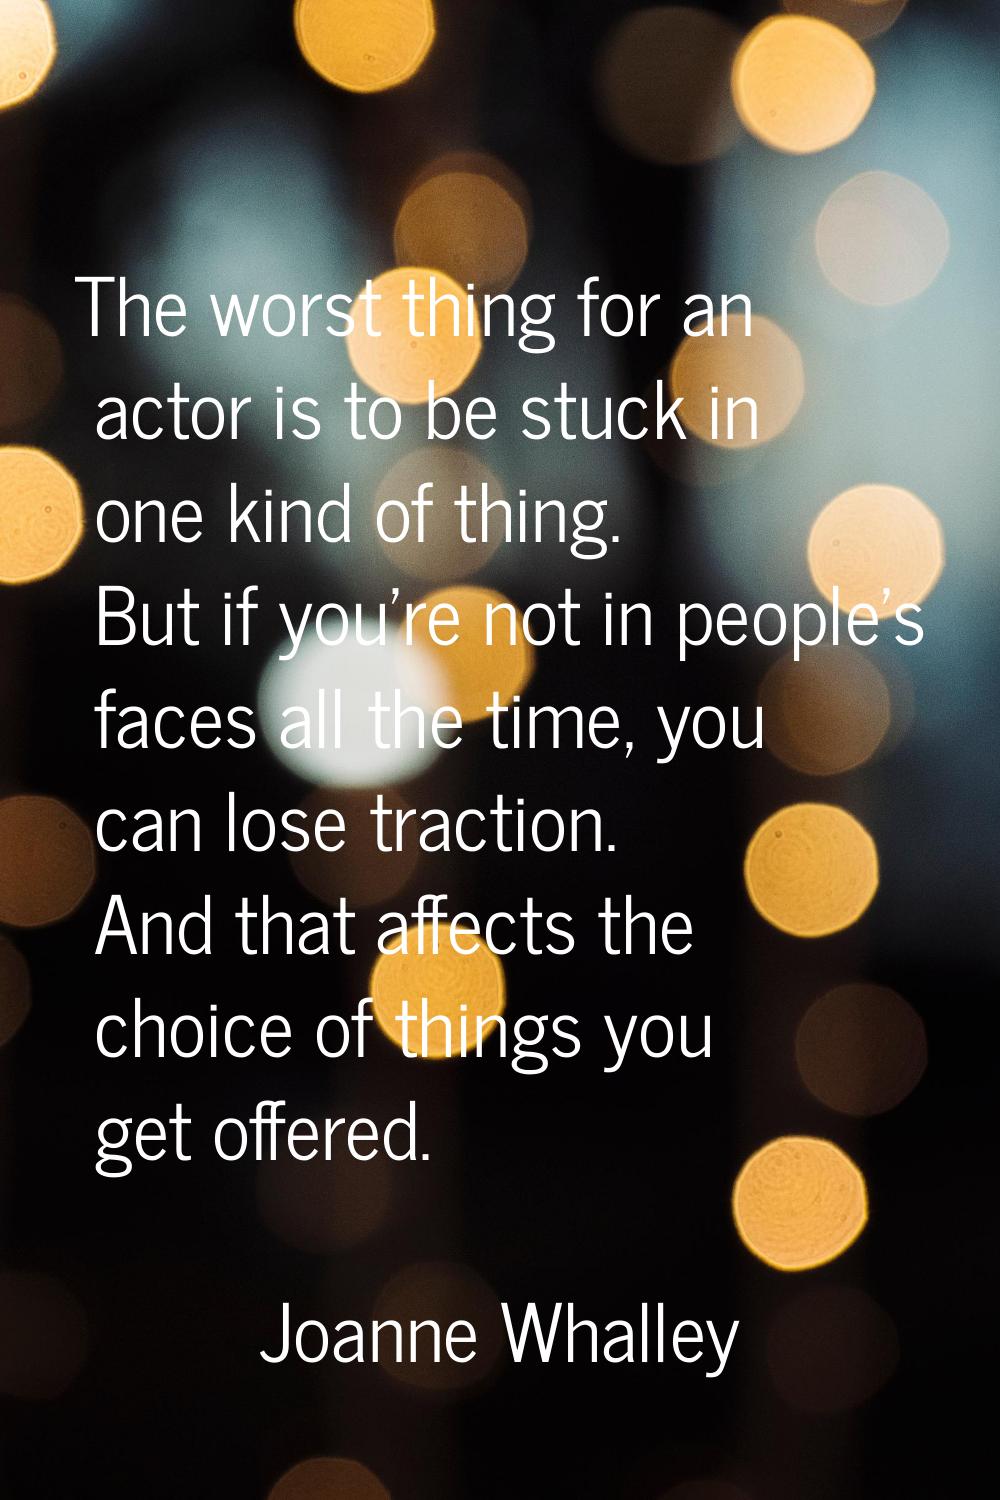 The worst thing for an actor is to be stuck in one kind of thing. But if you're not in people's fac